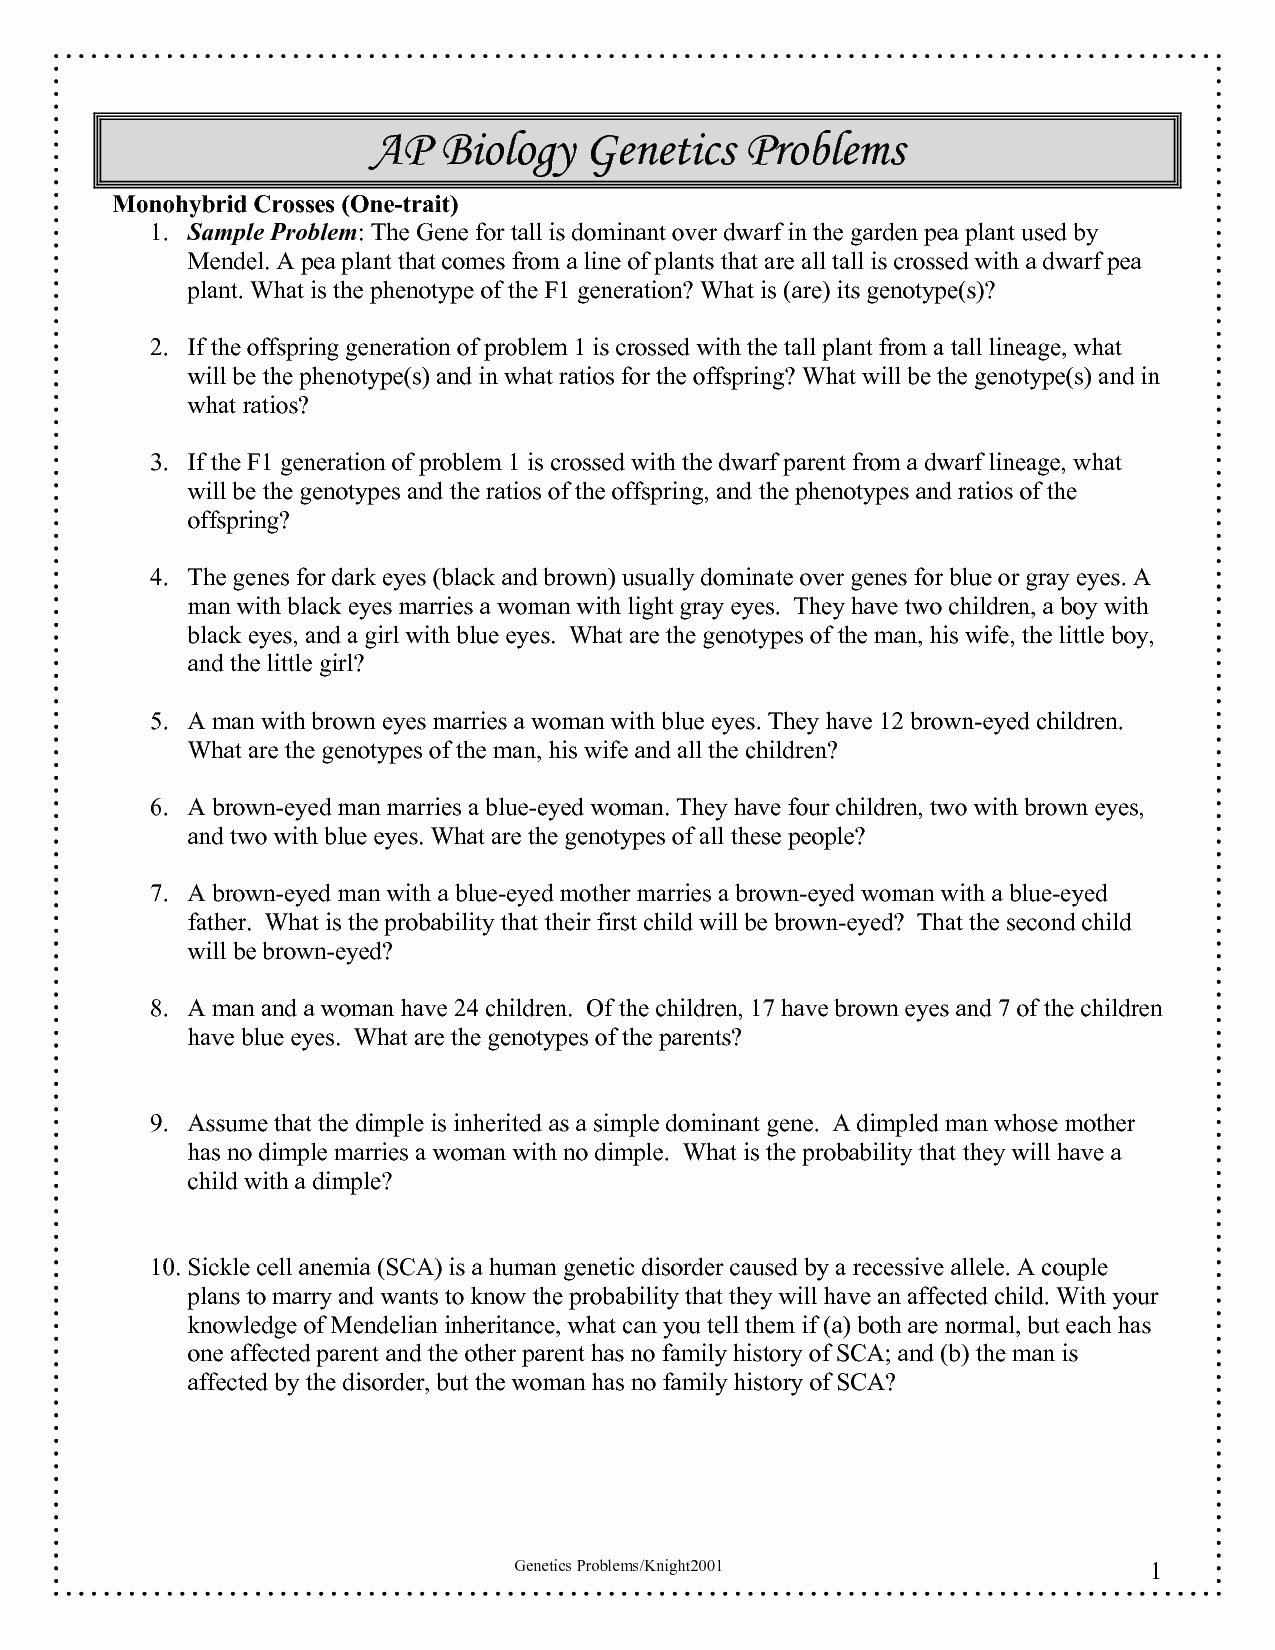 Average atomic Mass Worksheet Answers New Preschool Worksheets Staggering isotopes and Average